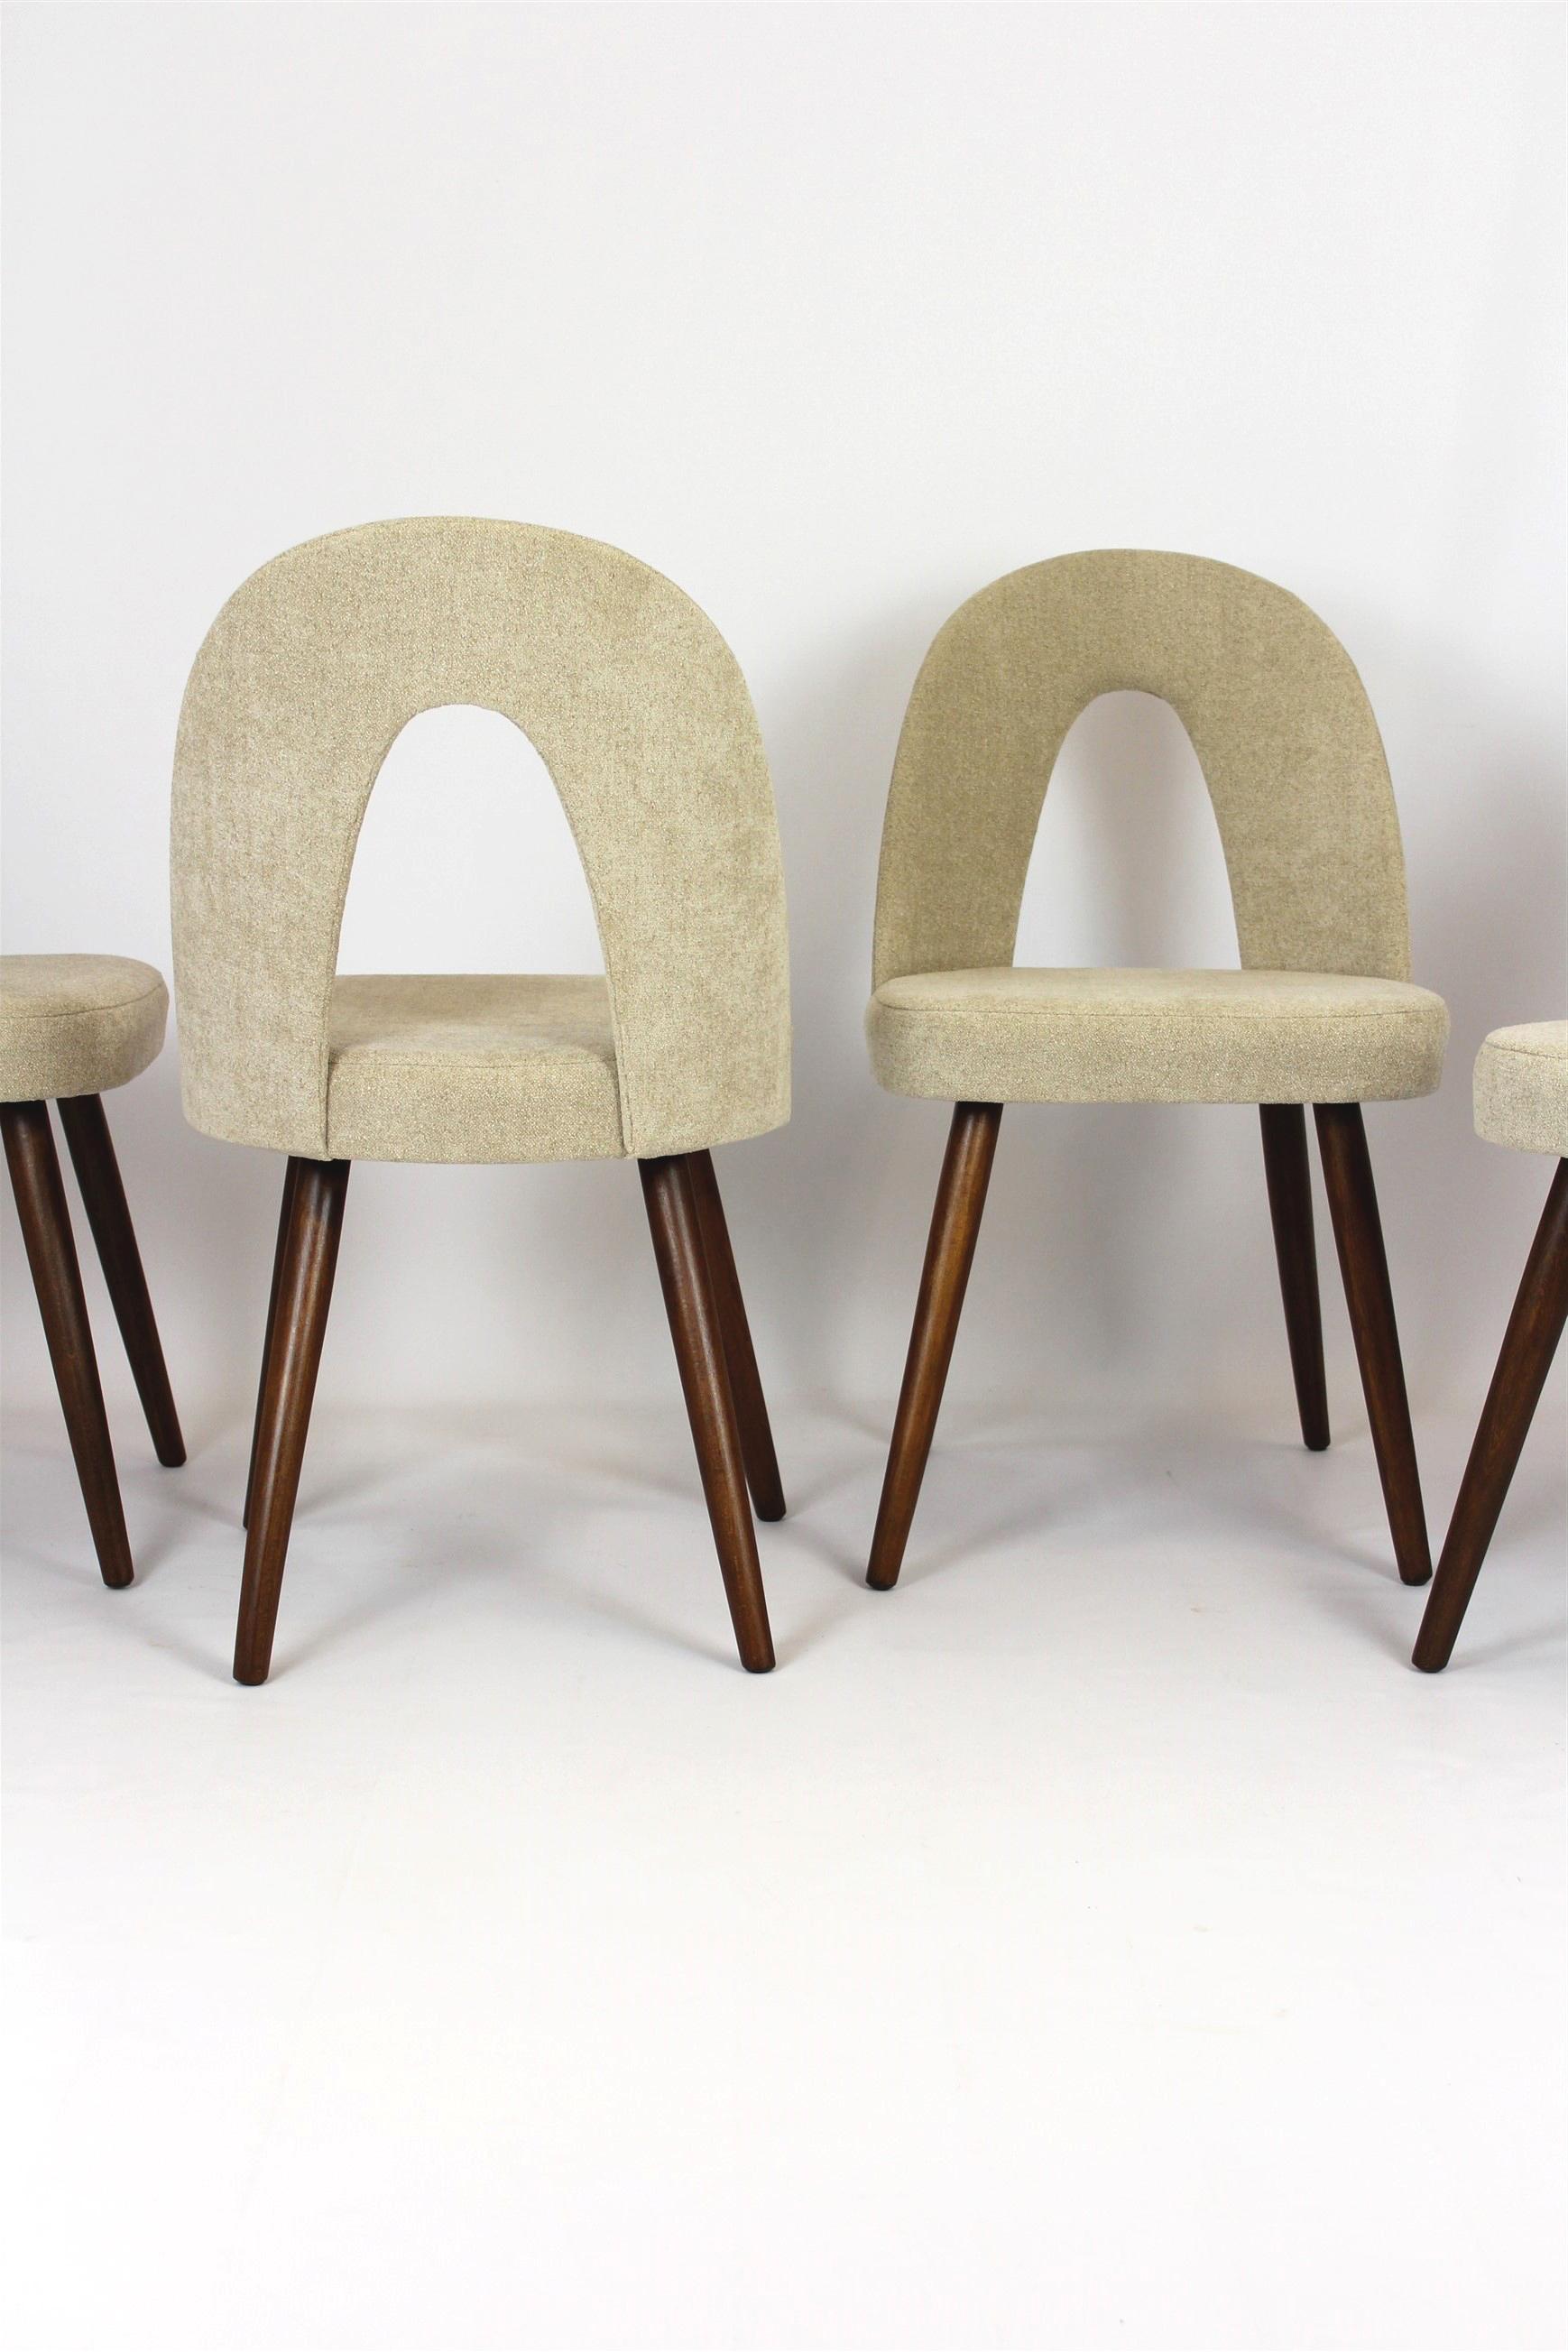 20th Century Restored Dining Chairs in Bouclé Upholstery by Antonin Suman, 1960s, Set of 4